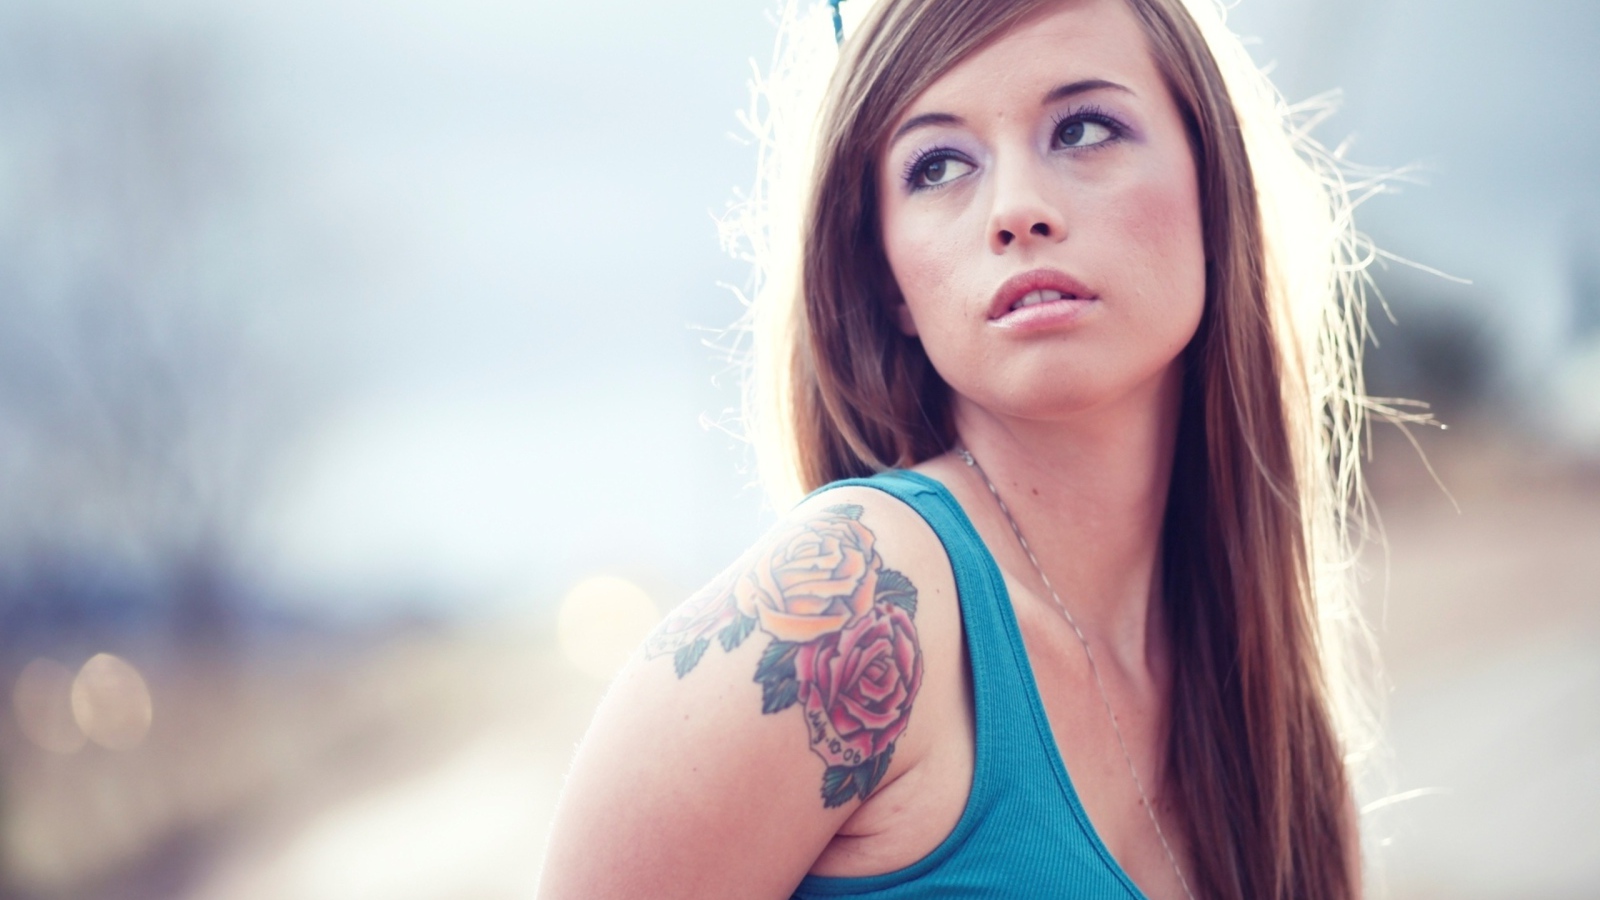 Girl with tattoo roses